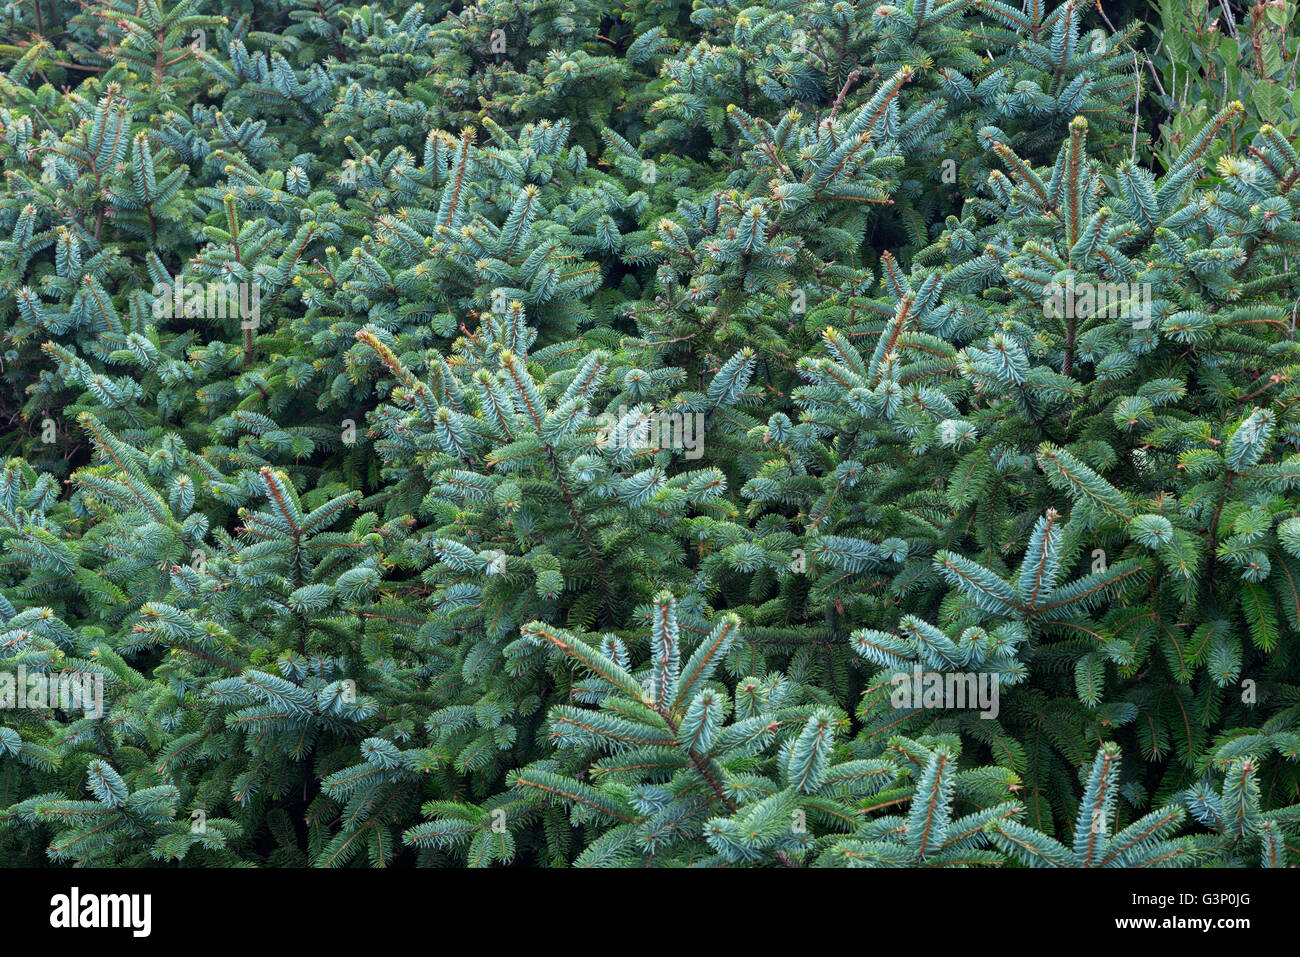 USA, Oregon, Neptune State Scenic Viewpoint, Low, dense growth of Sitka spruce (Picea sitchensis) branches near shoreline. Stock Photo